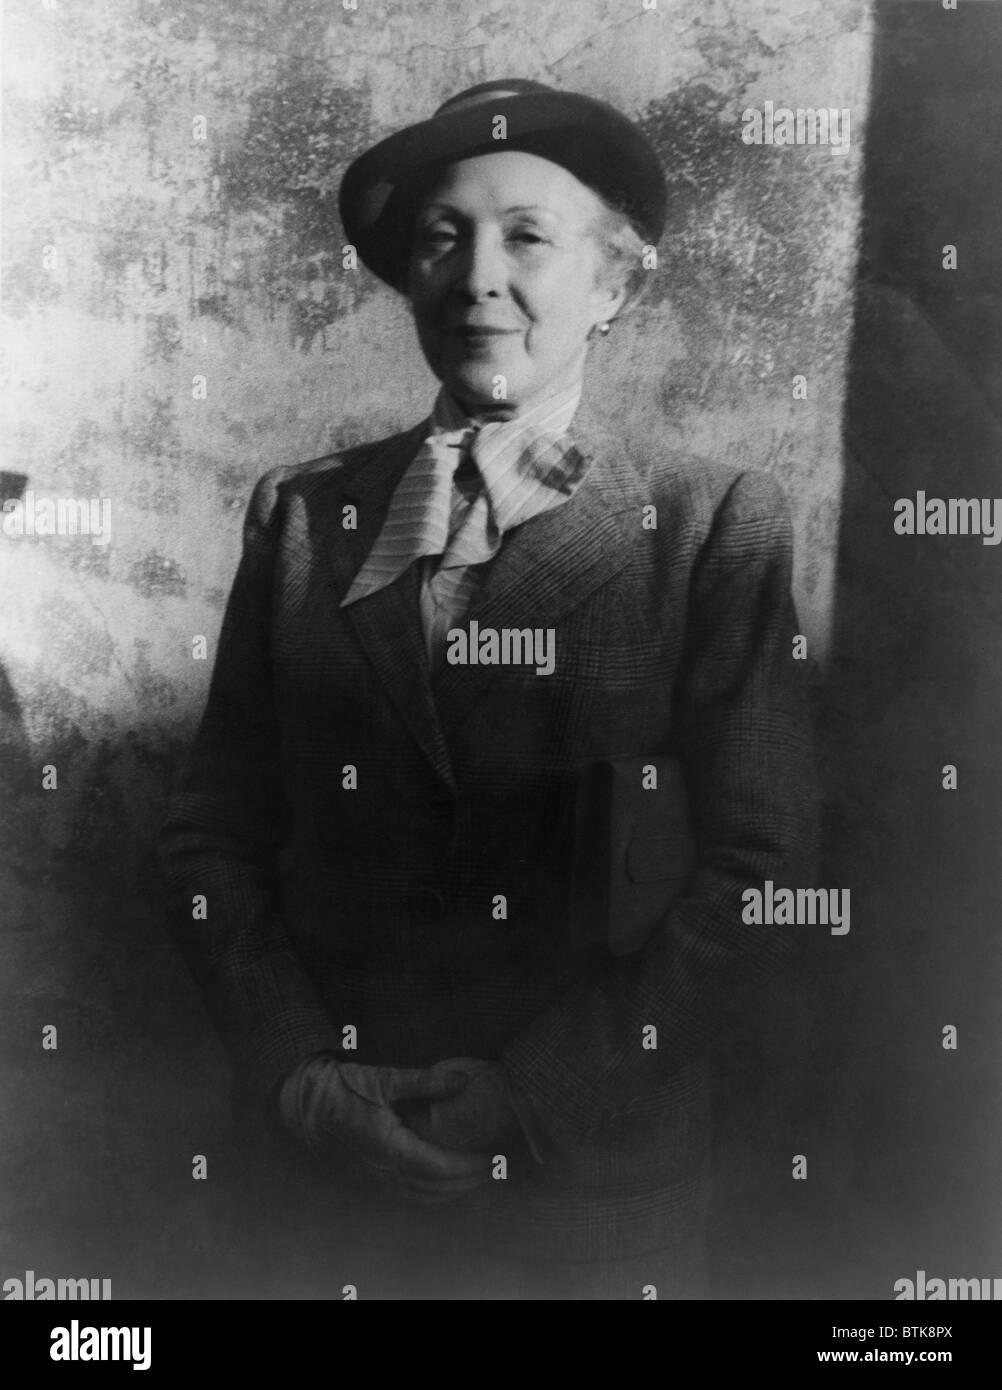 Marie Laurencin (1883-1956), French painter and printmaker who associated with Paris avant- garde and Cubists. She painted refined expressionist portraits of women. 1949 photo by Carl Van Vechten. Stock Photo